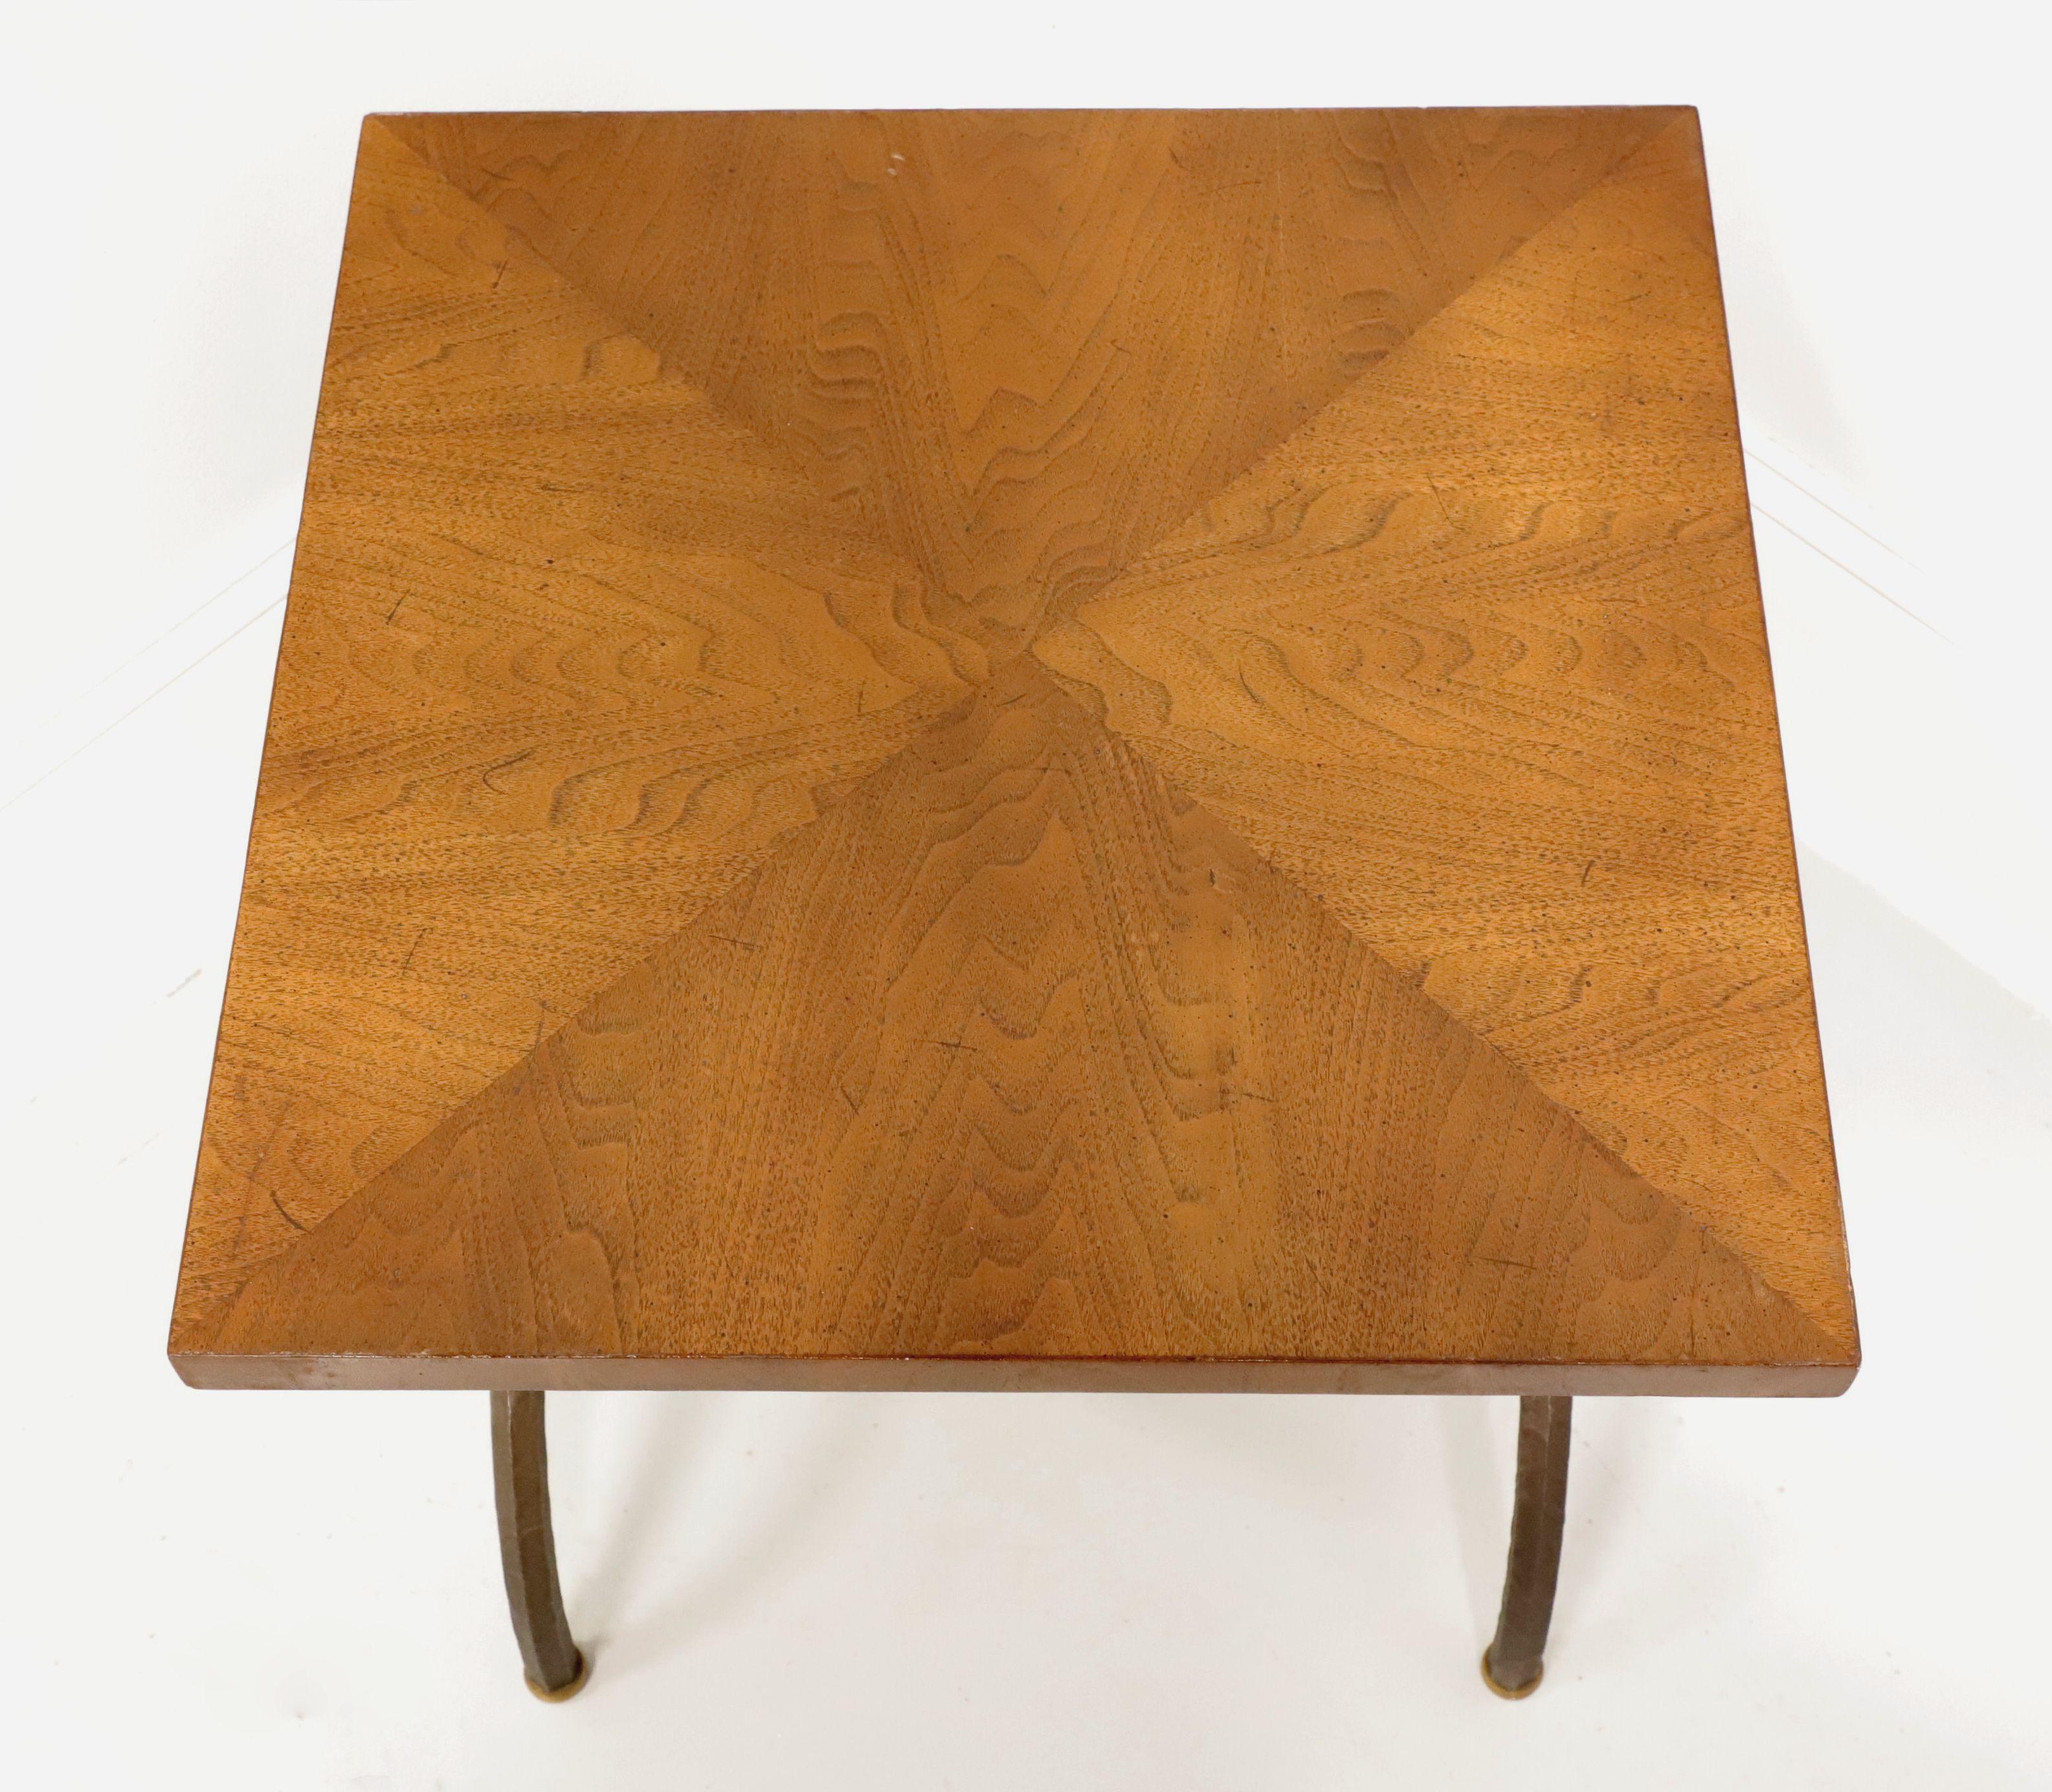 TOMLINSON 1960's Walnut Square Cocktail Table with Metal Legs - A In Good Condition For Sale In Charlotte, NC